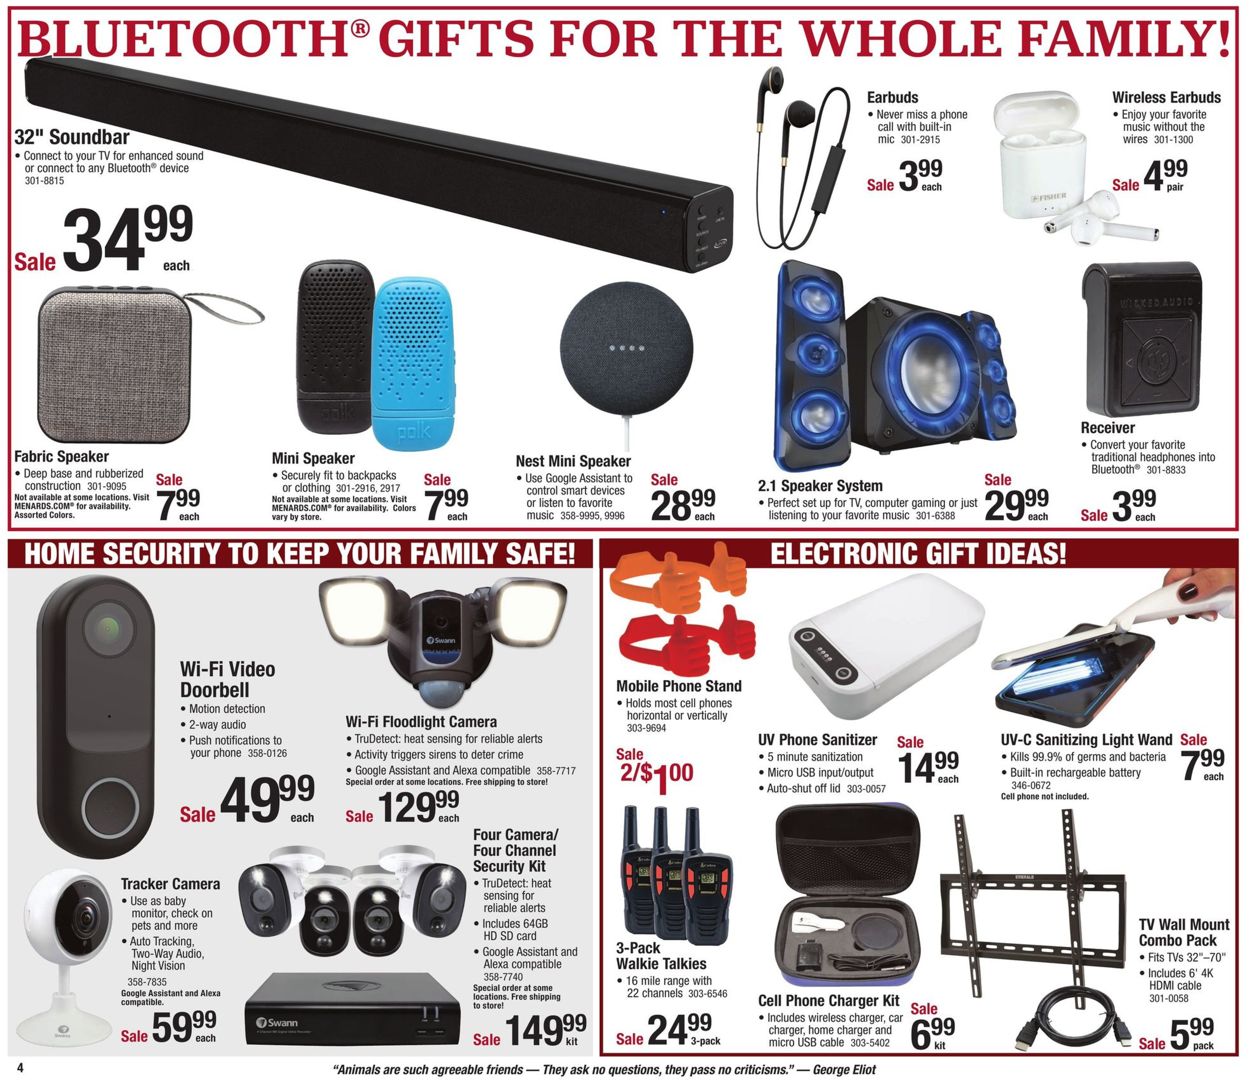 Catalogue Menards Last Minute Gift Sale 2020 from 12/15/2020